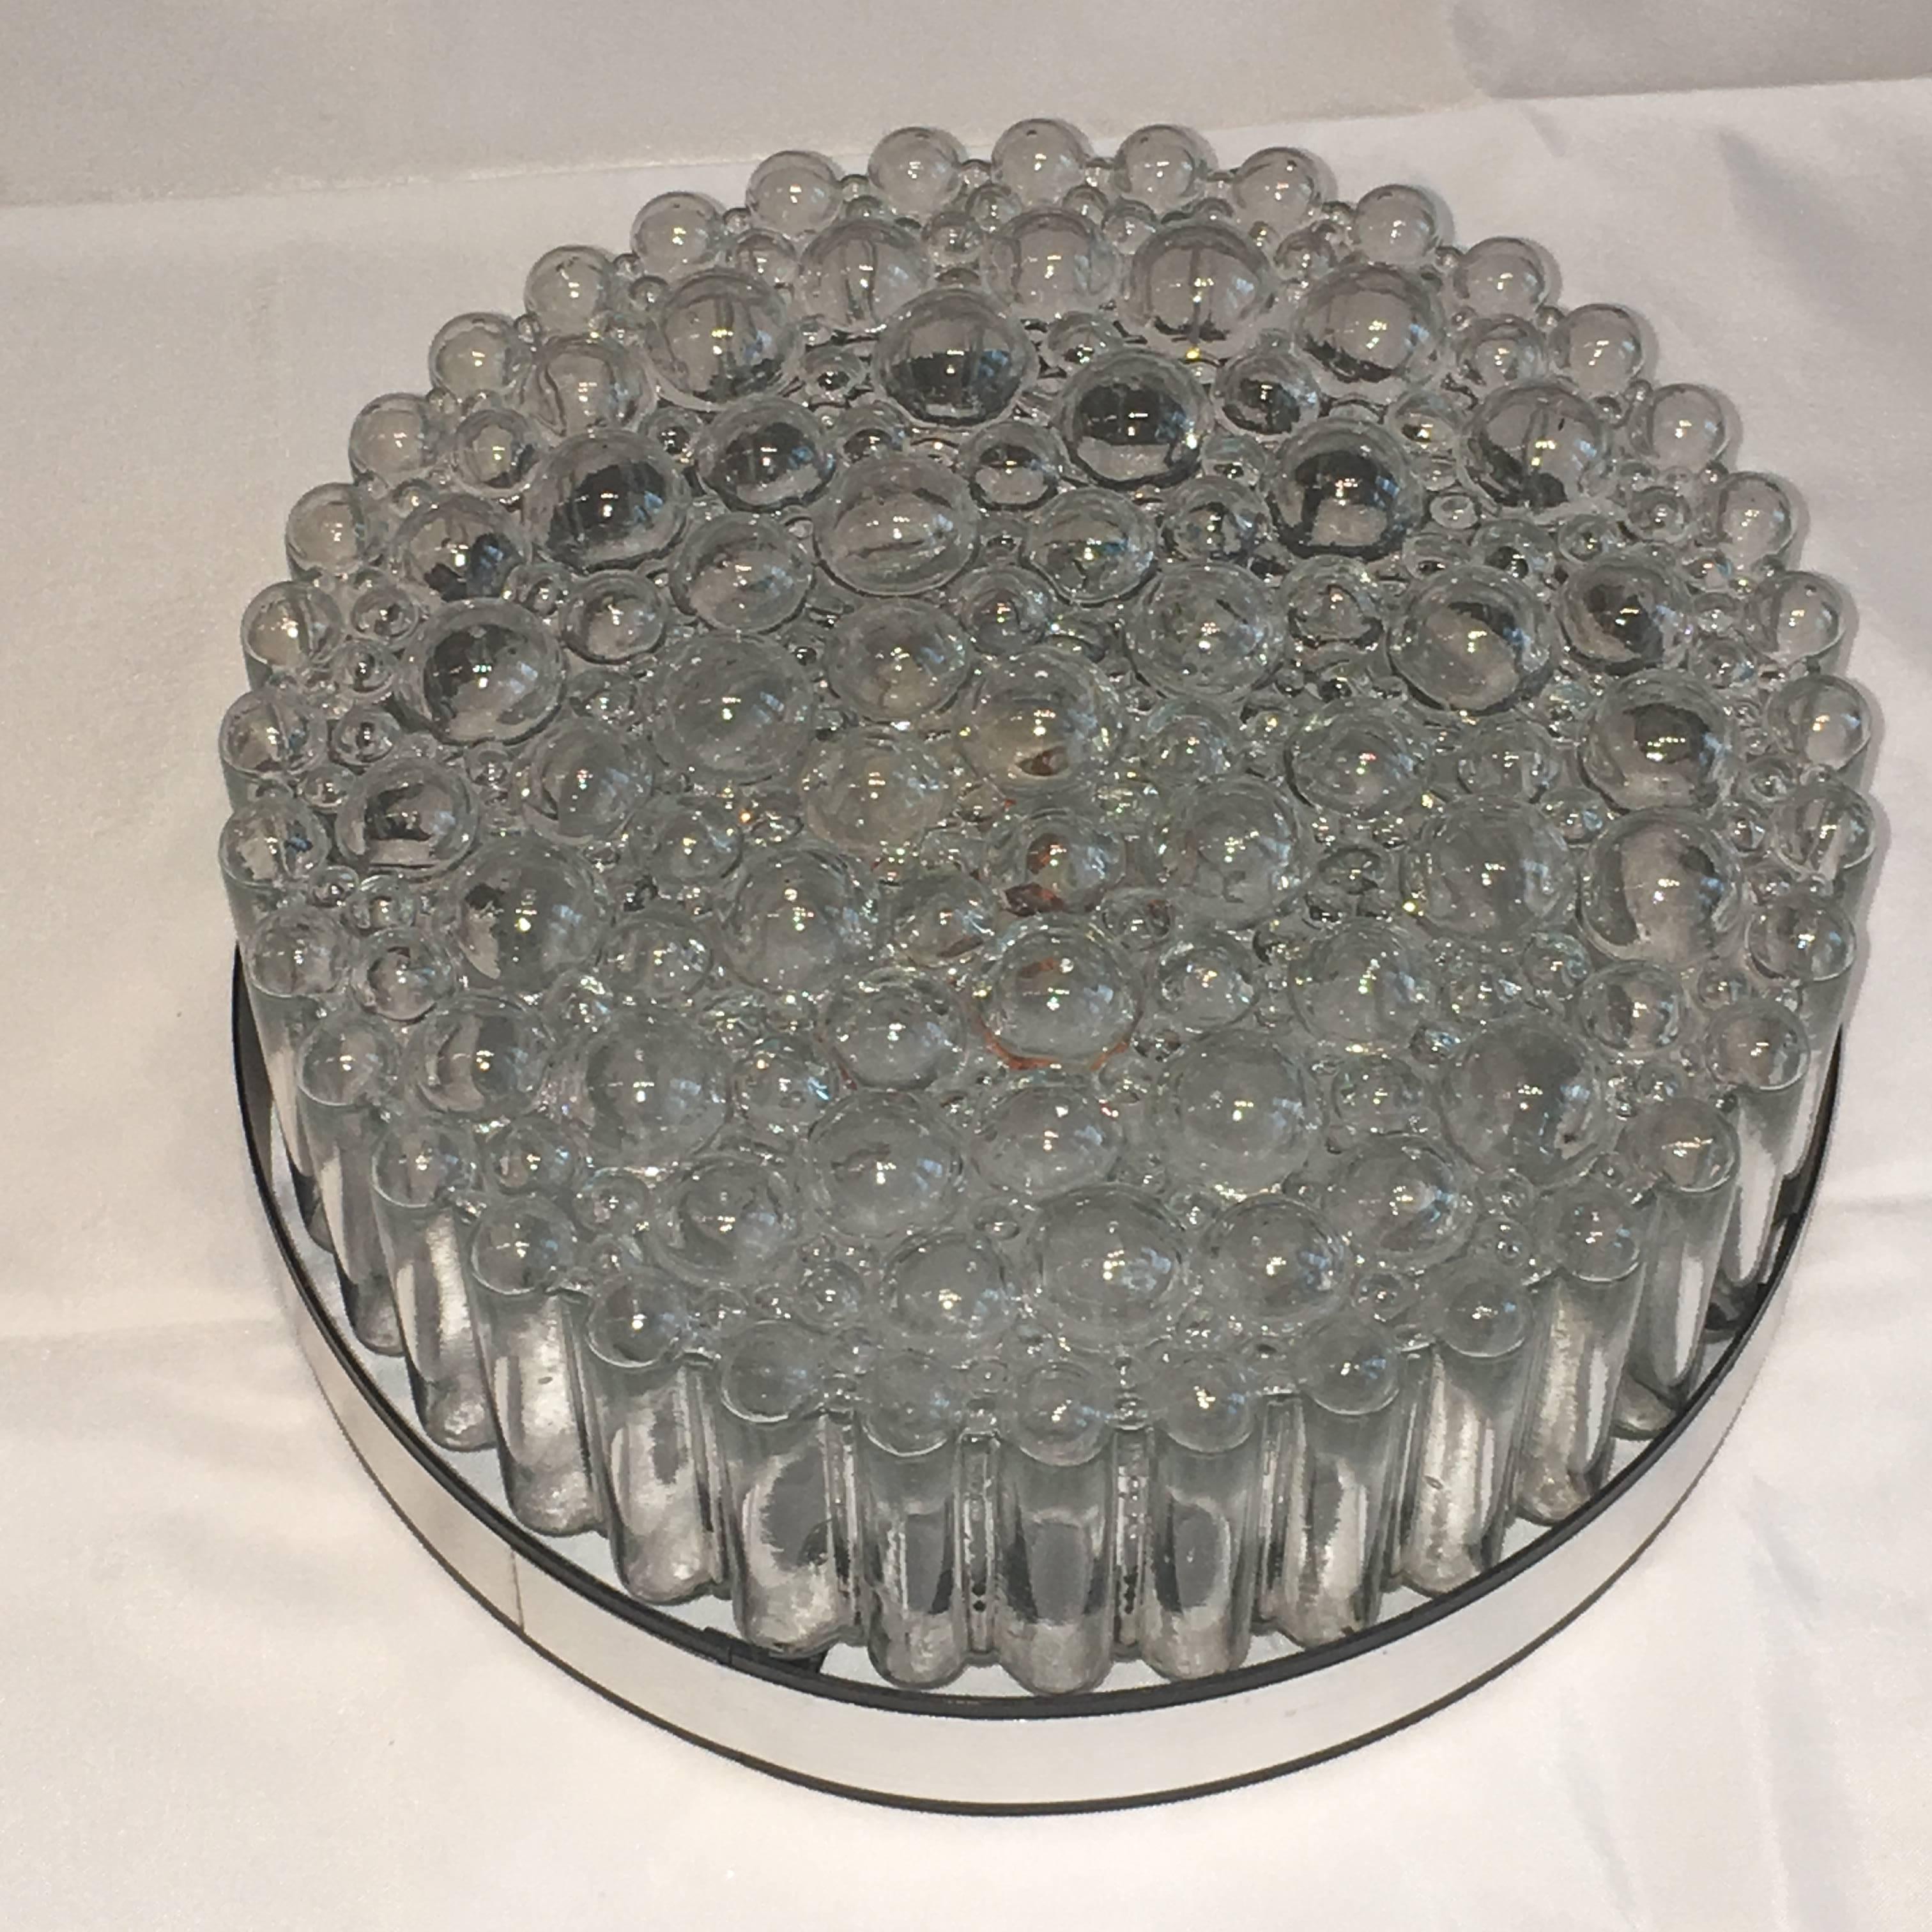 A beautiful flush mount. Made in Germany. Gorgeous textured glass. Flush mount with metal fixture. The fixture requires one European E27 Edison or medium bulb up to 60 watts.